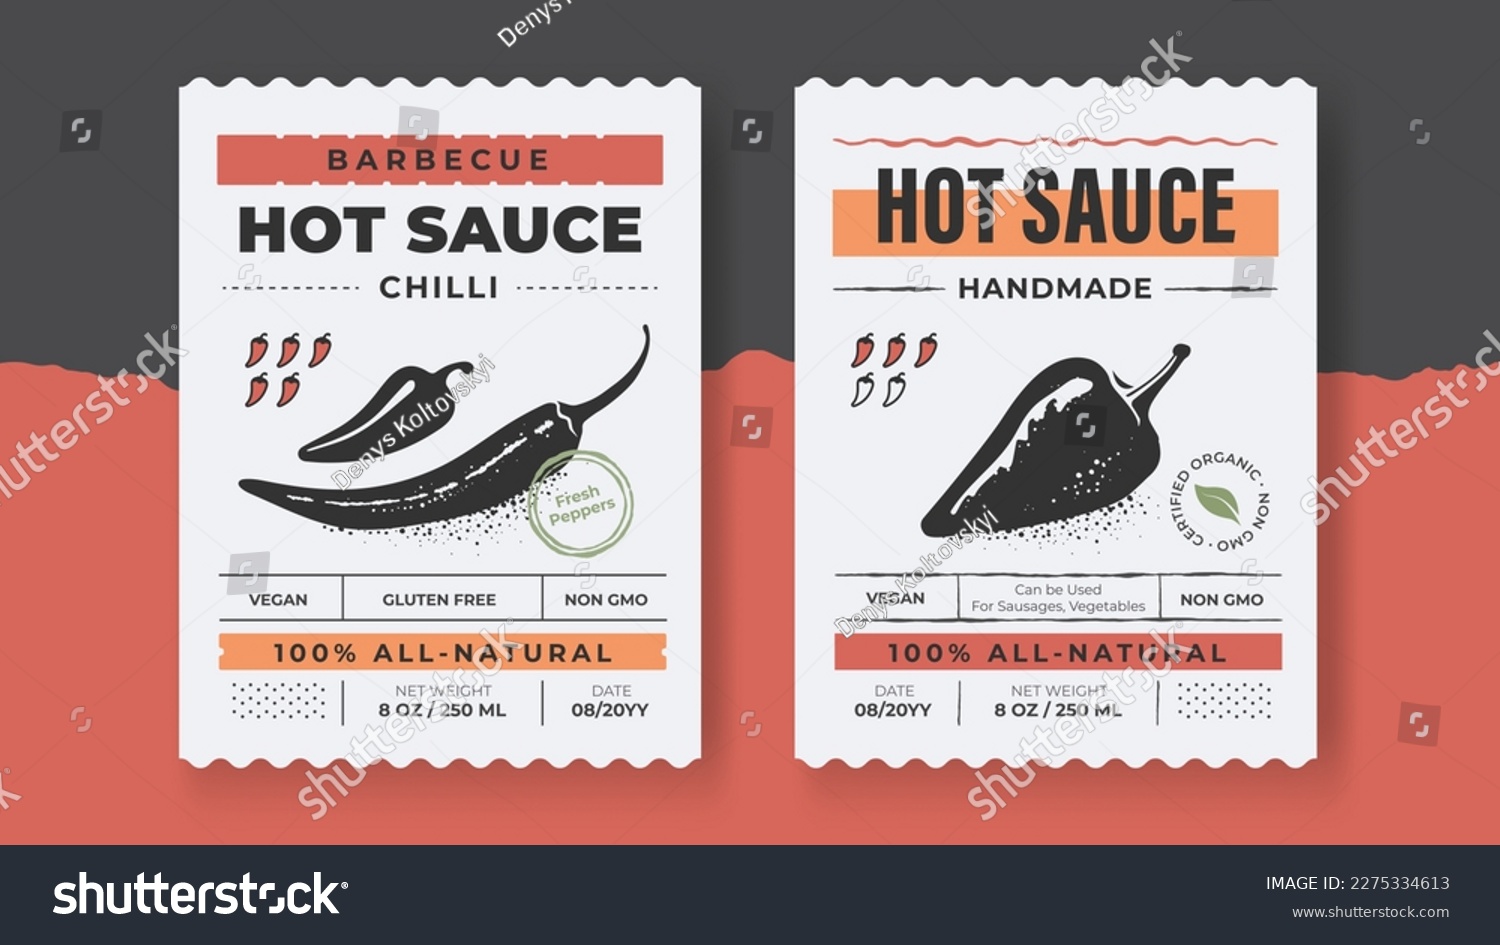 Packaging design for chili pepper. Hot Sauce vintage product label template. Retro package with spicy ingredients. #2275334613